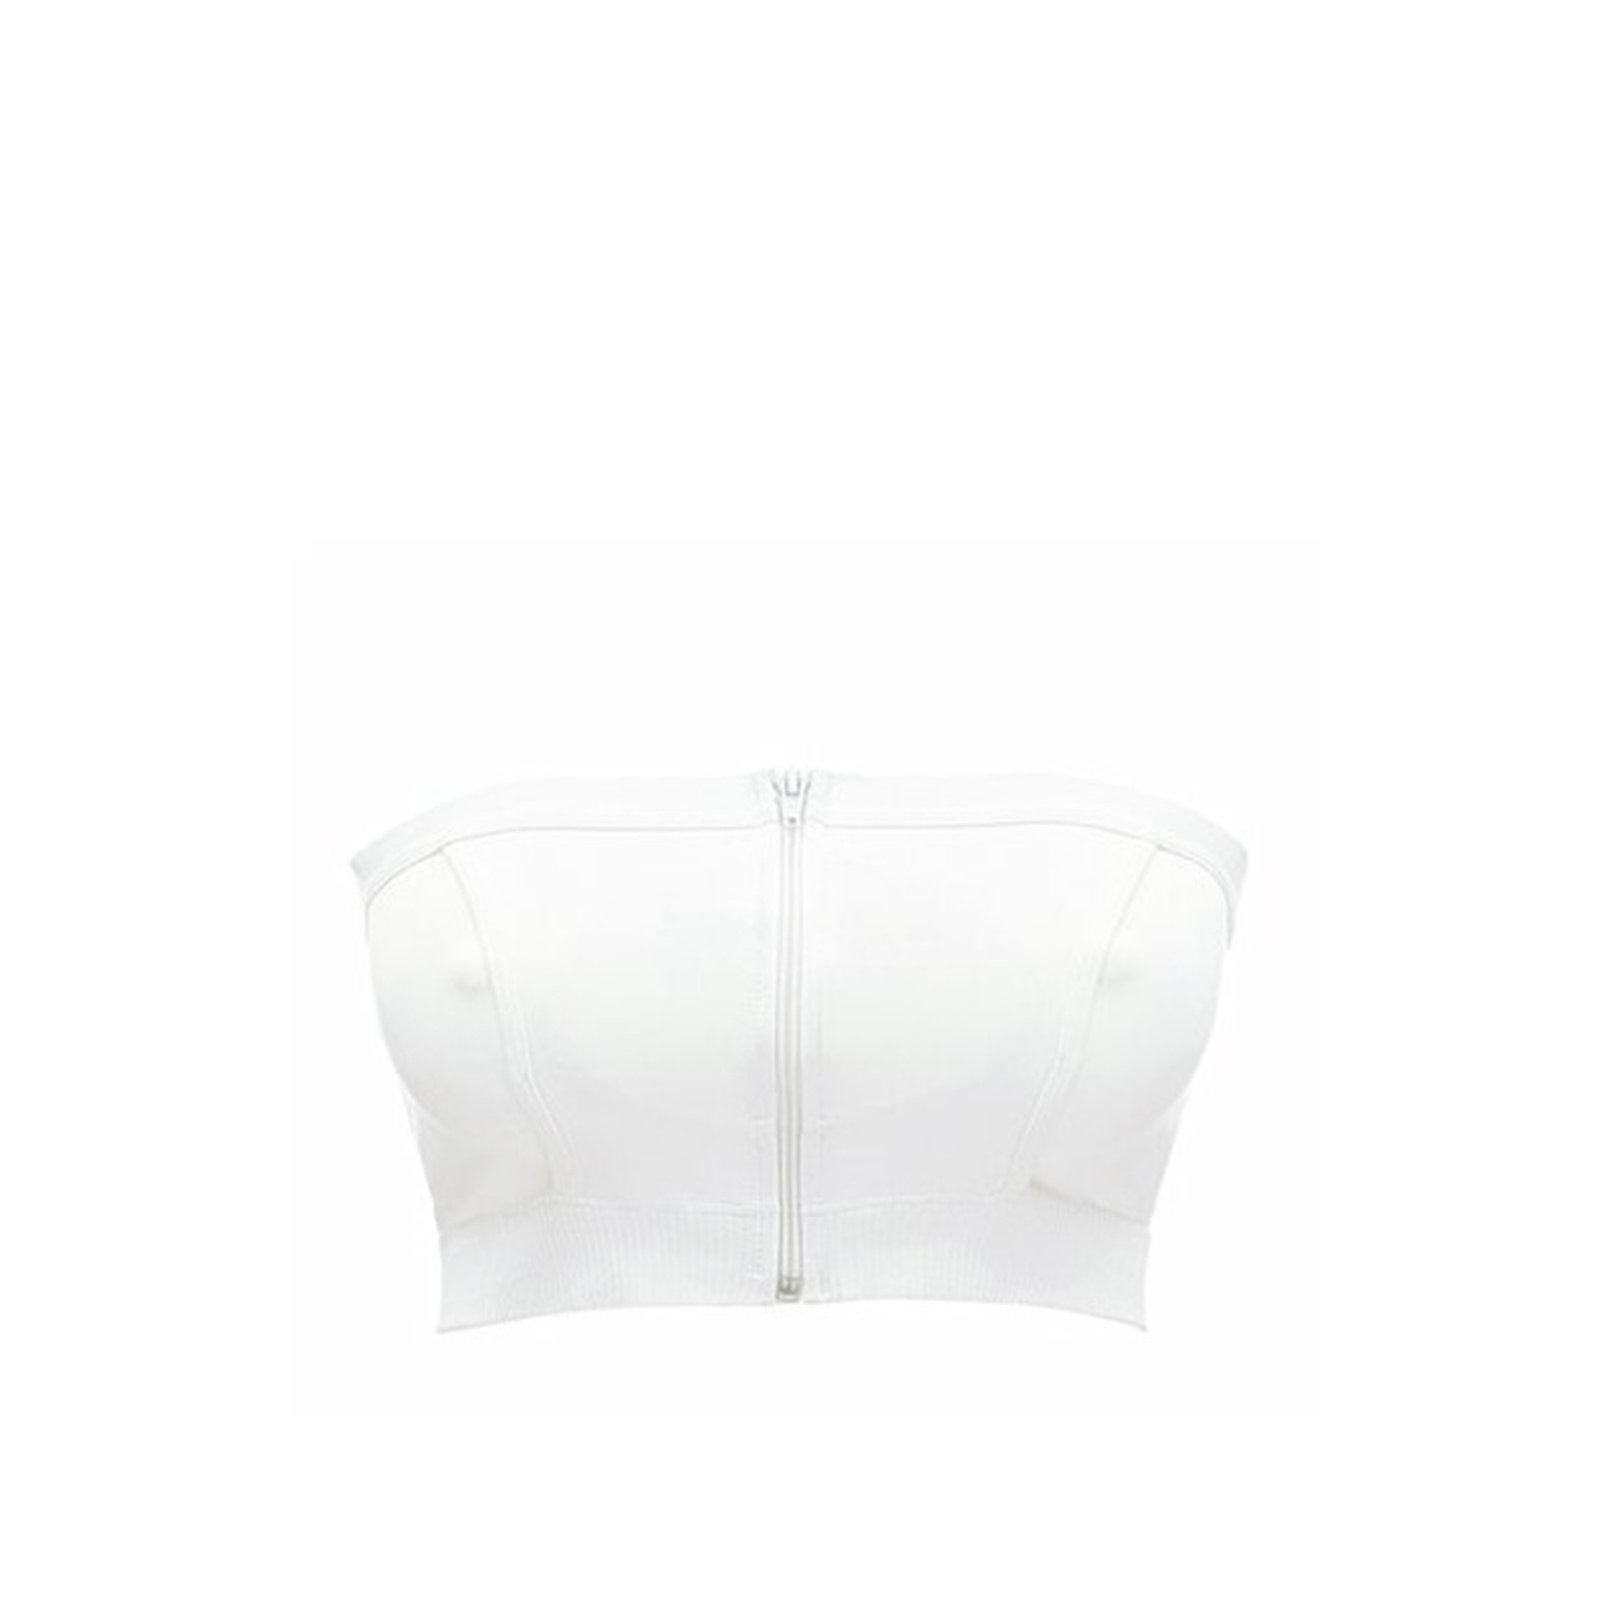 Comprar Medela Hands-Free Pumping Bustier White Small Size x1 · Mozambique